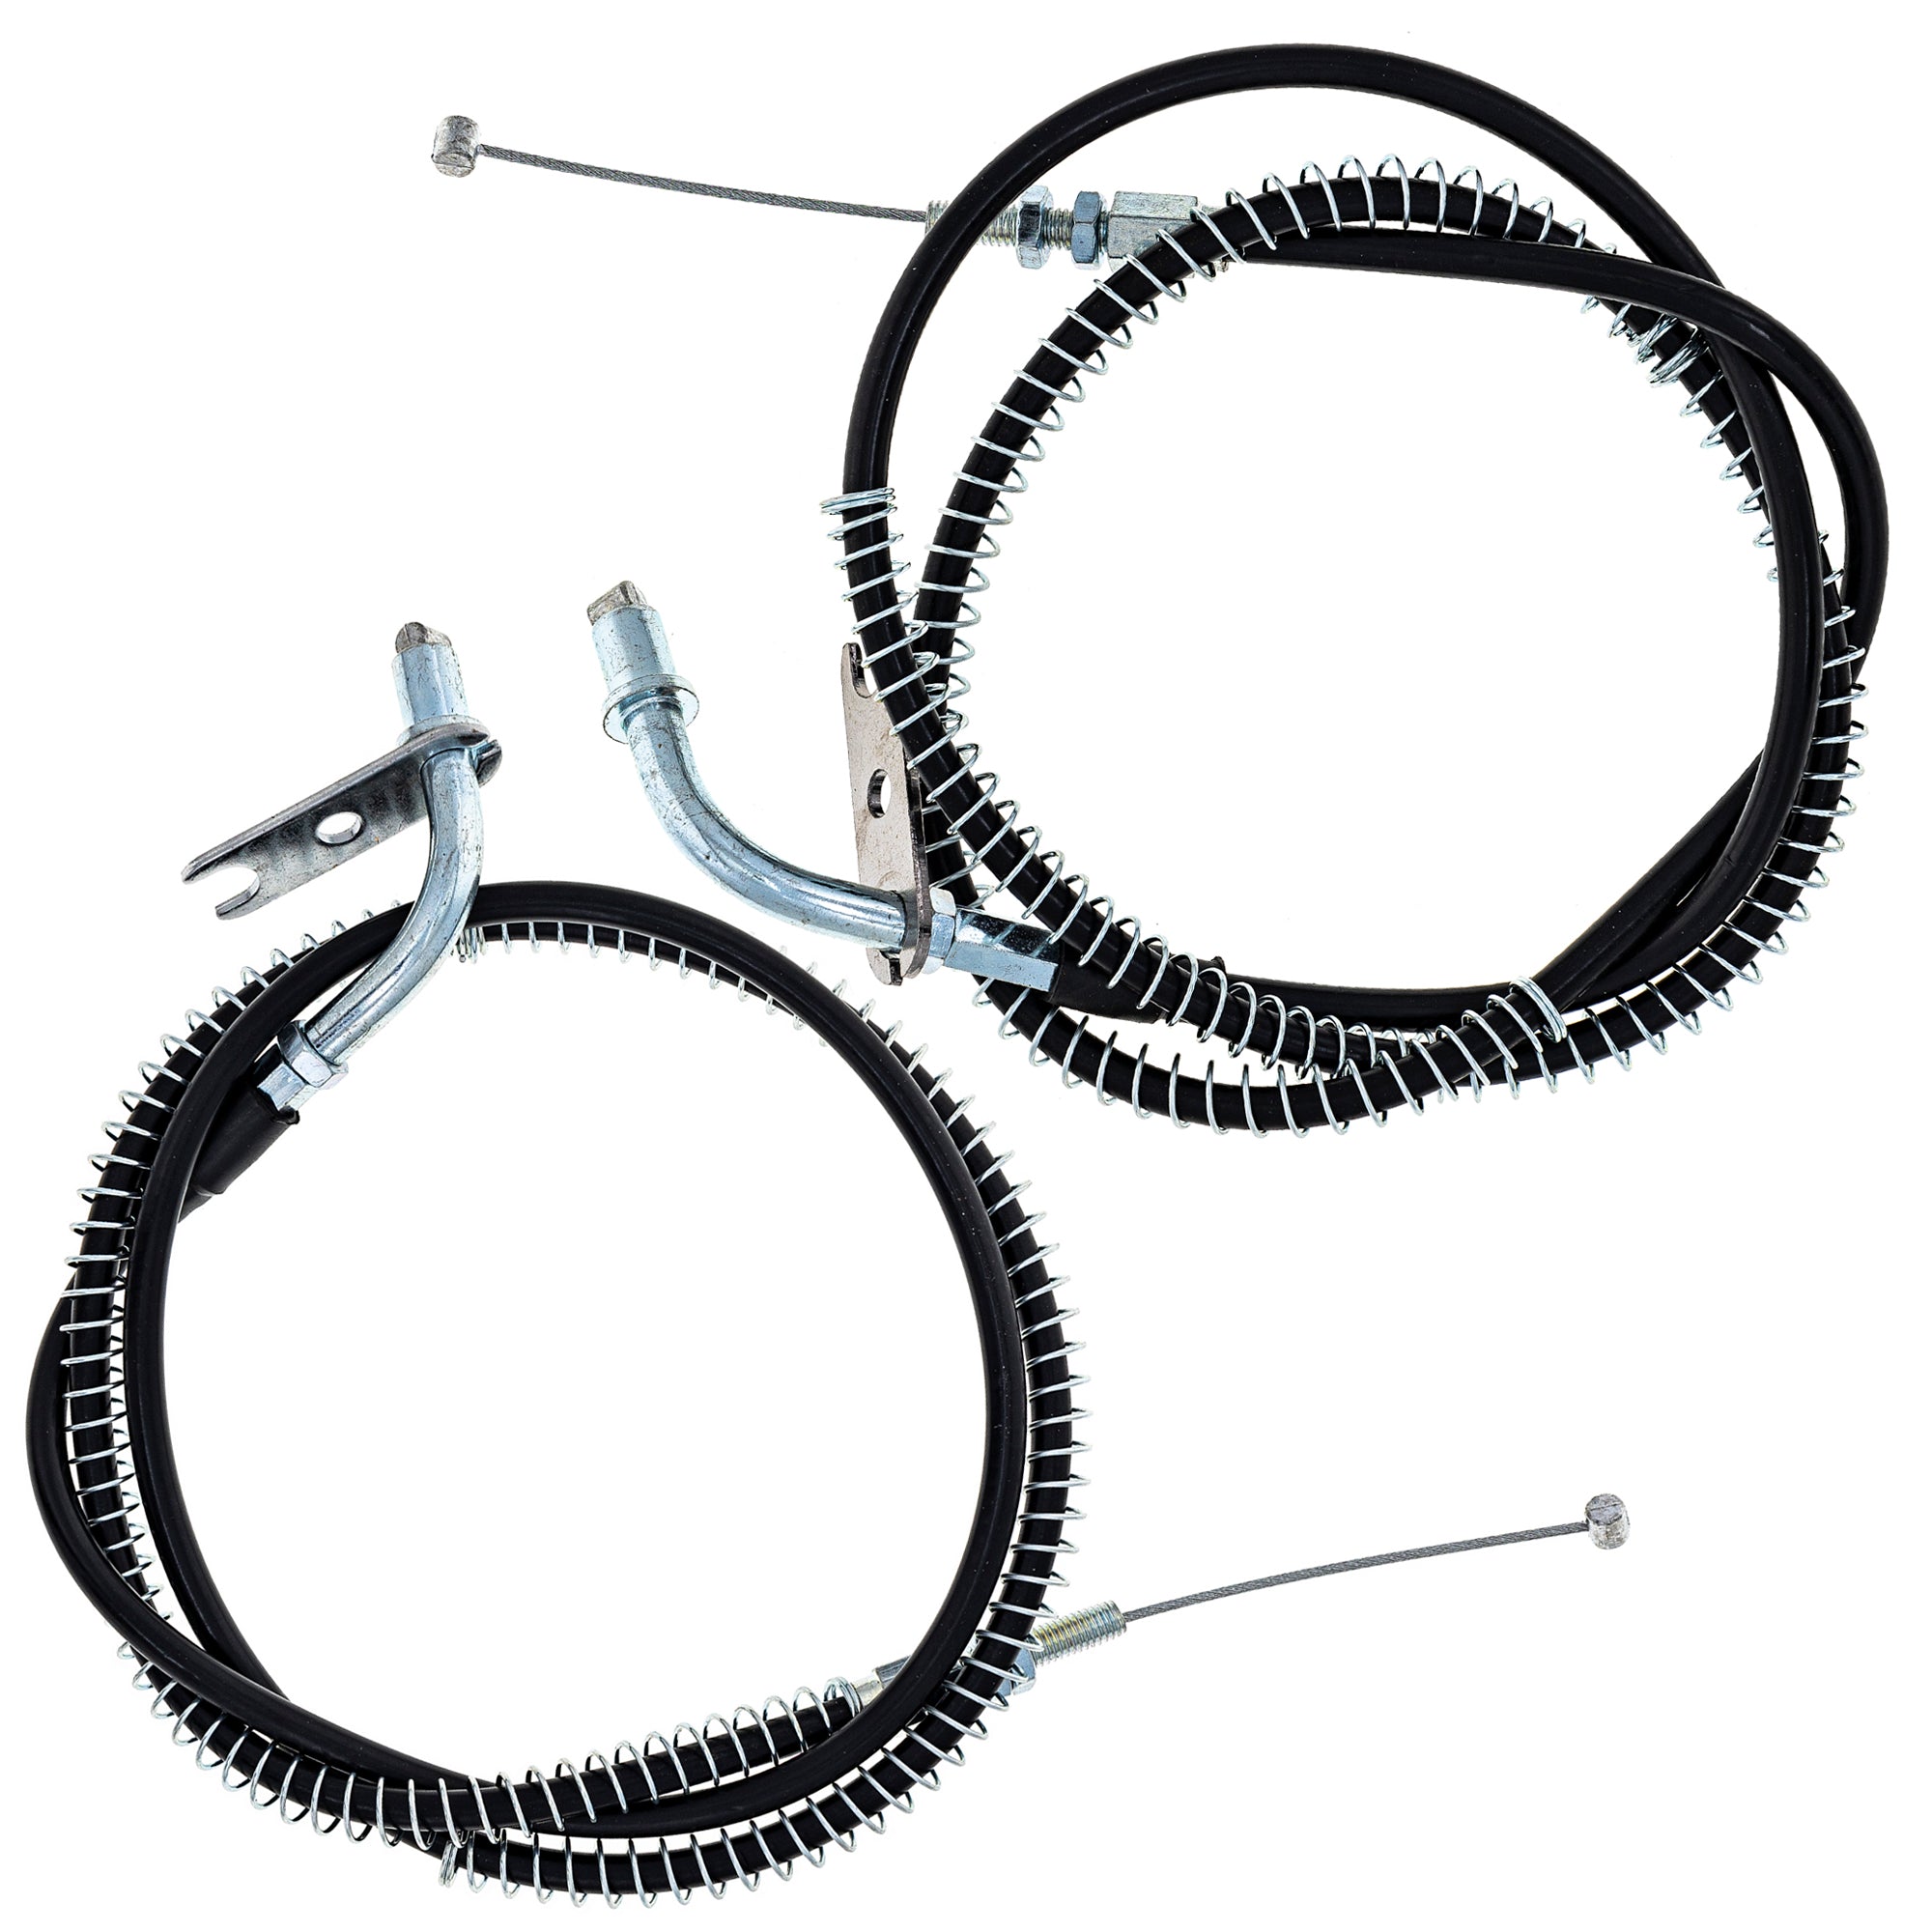 Throttle Cable Set for zOTHER Vulcan NICHE MK1005865